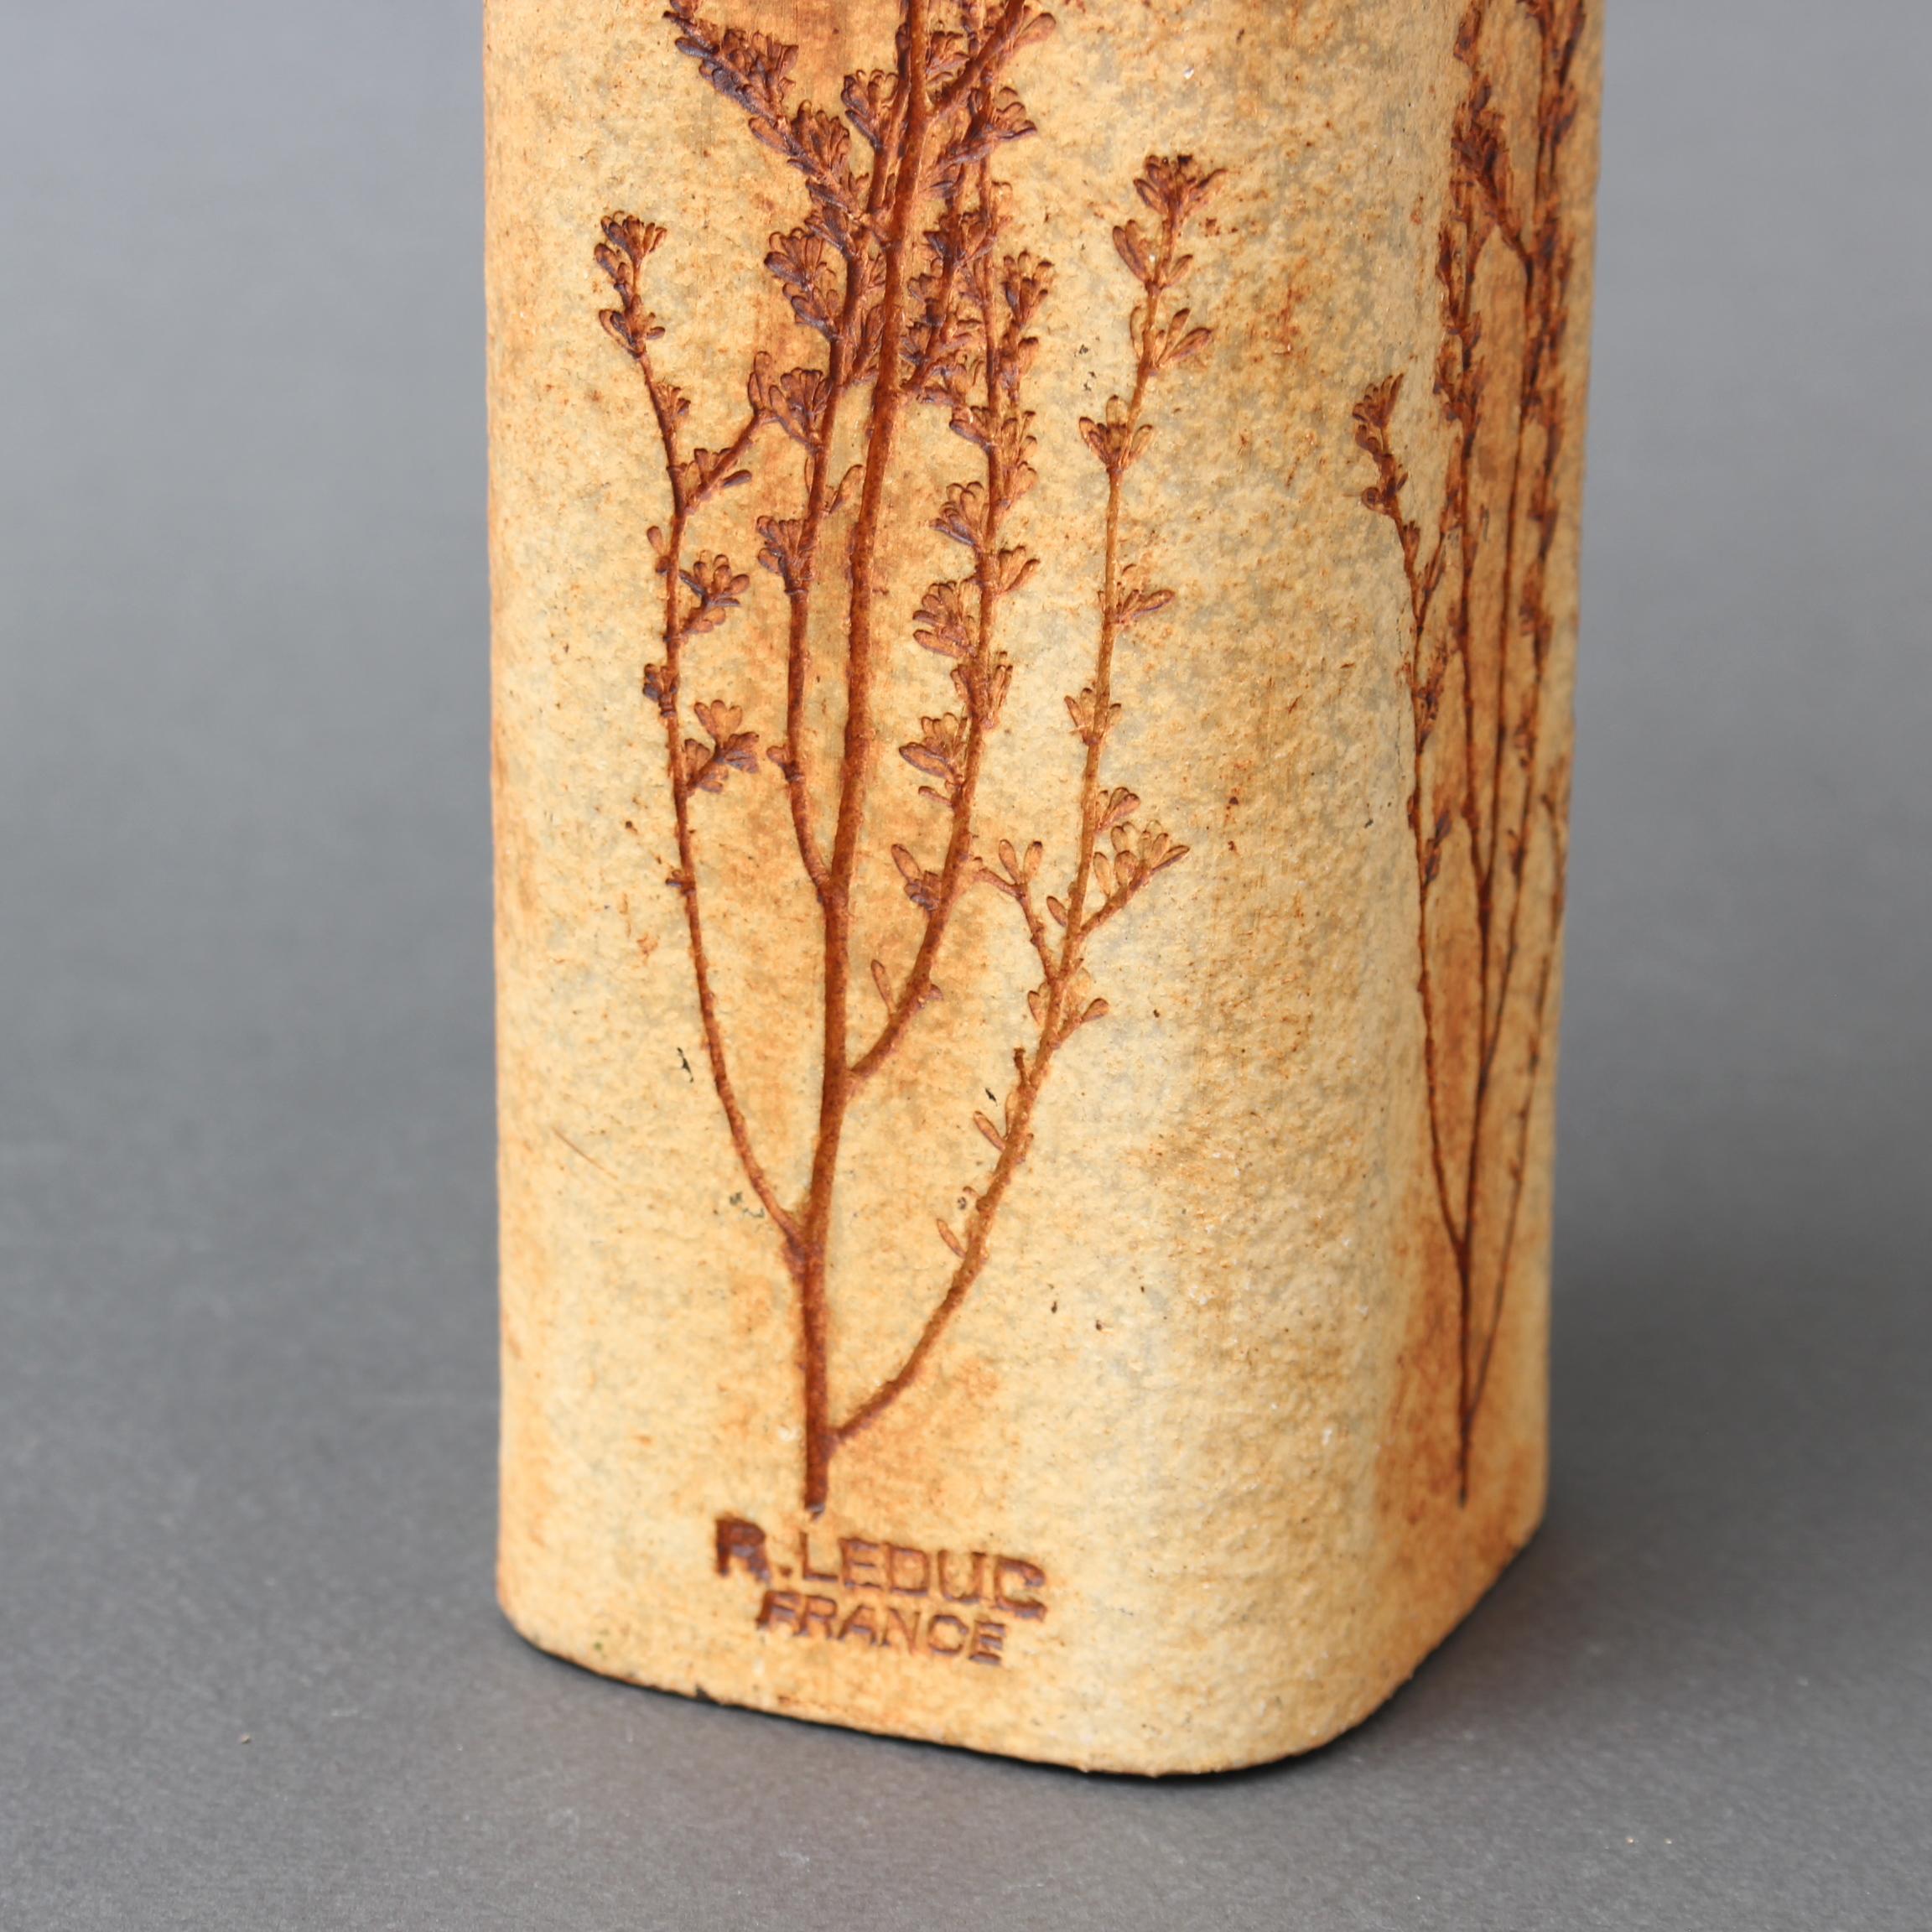 Vintage French Ceramic Vase with Plant Motif by Raymonde Leduc (circa 1960s) For Sale 7